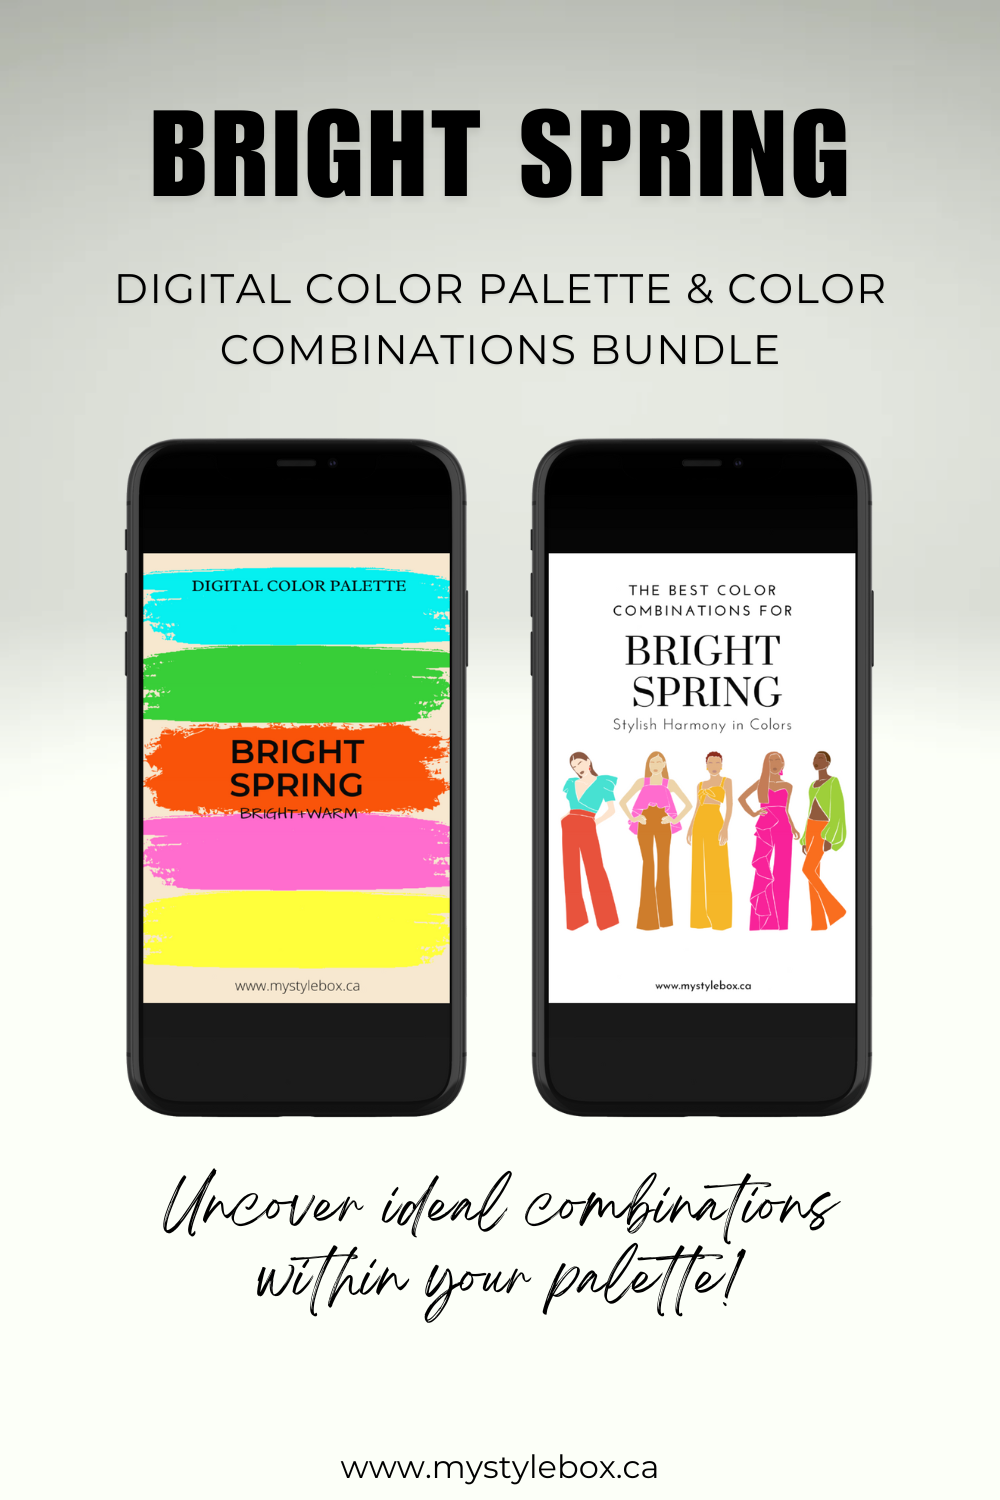 Bright Spring Digital Color Palette and Color Combinations